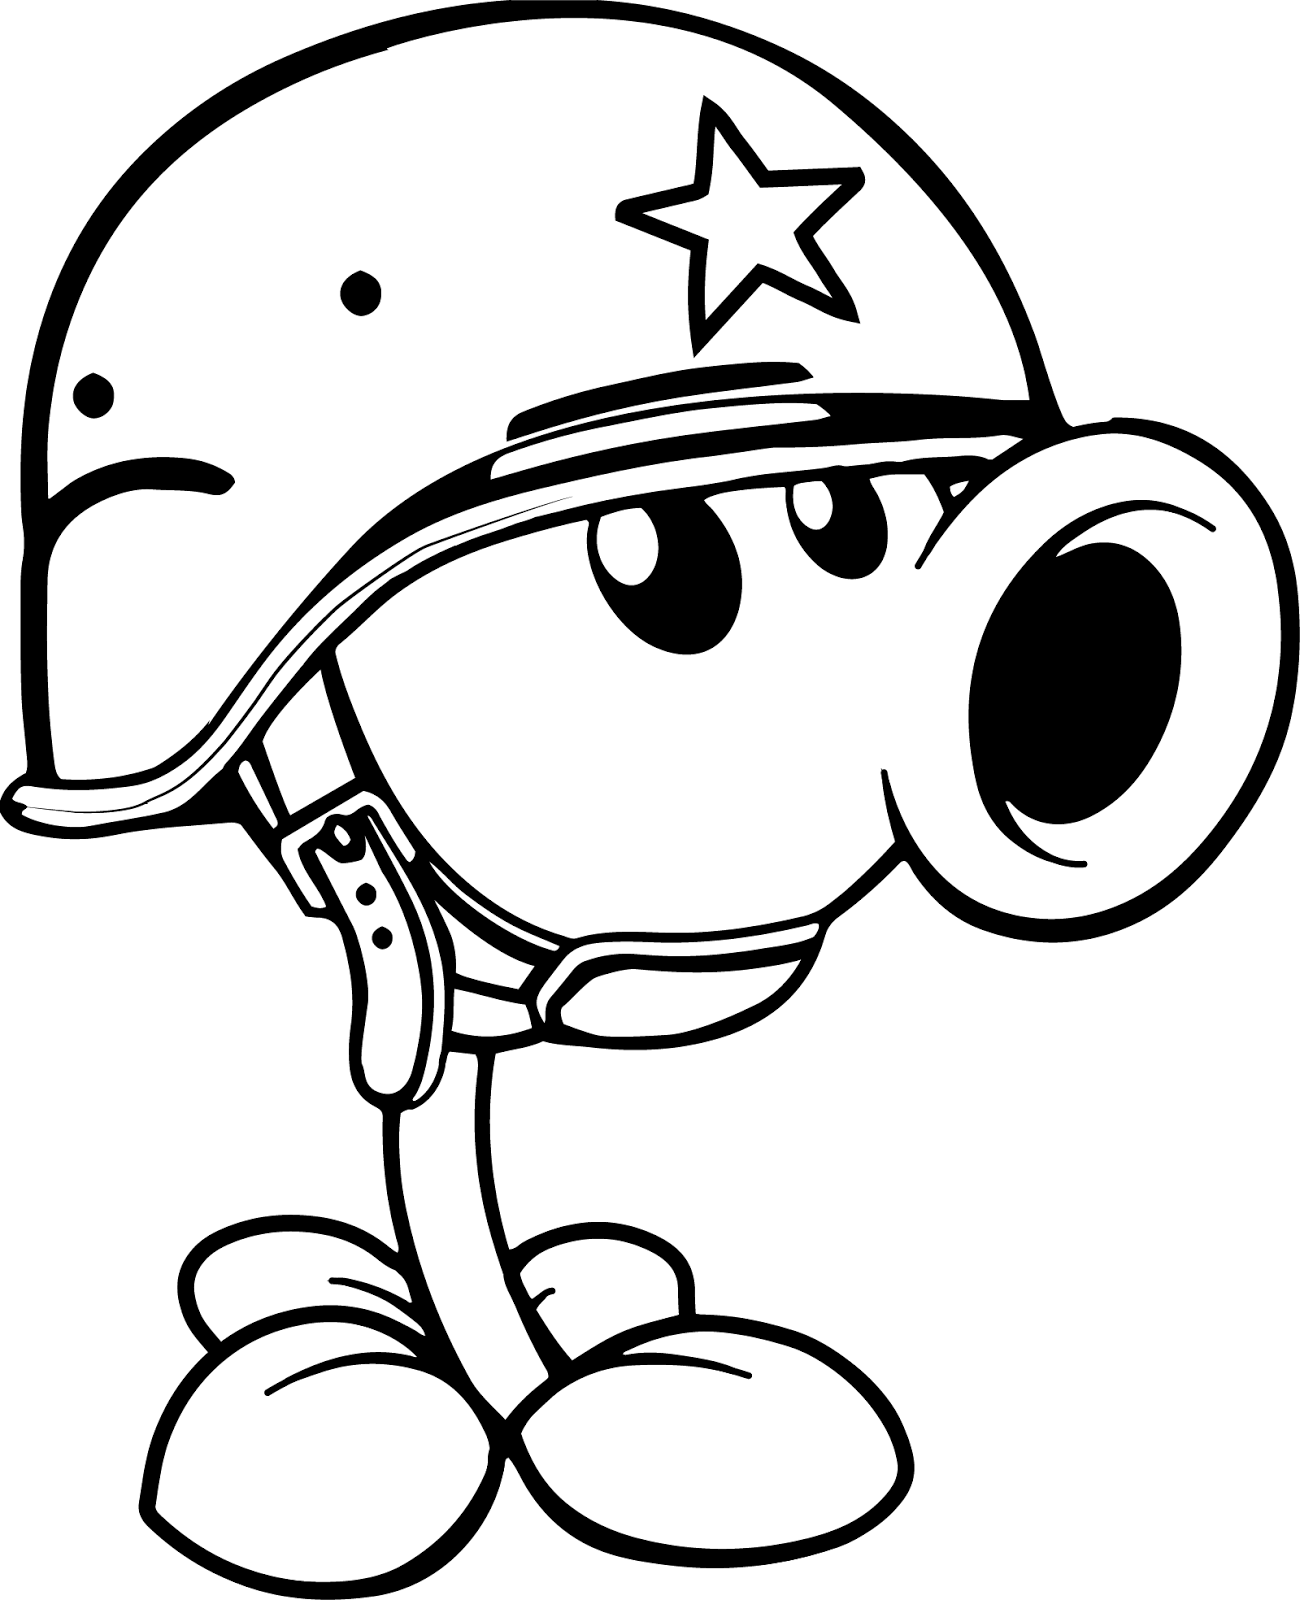 plants vs zombies coloring pages to print plant vs zombie coloring pages wdwnotjustforkidscom zombies coloring vs to plants print pages 